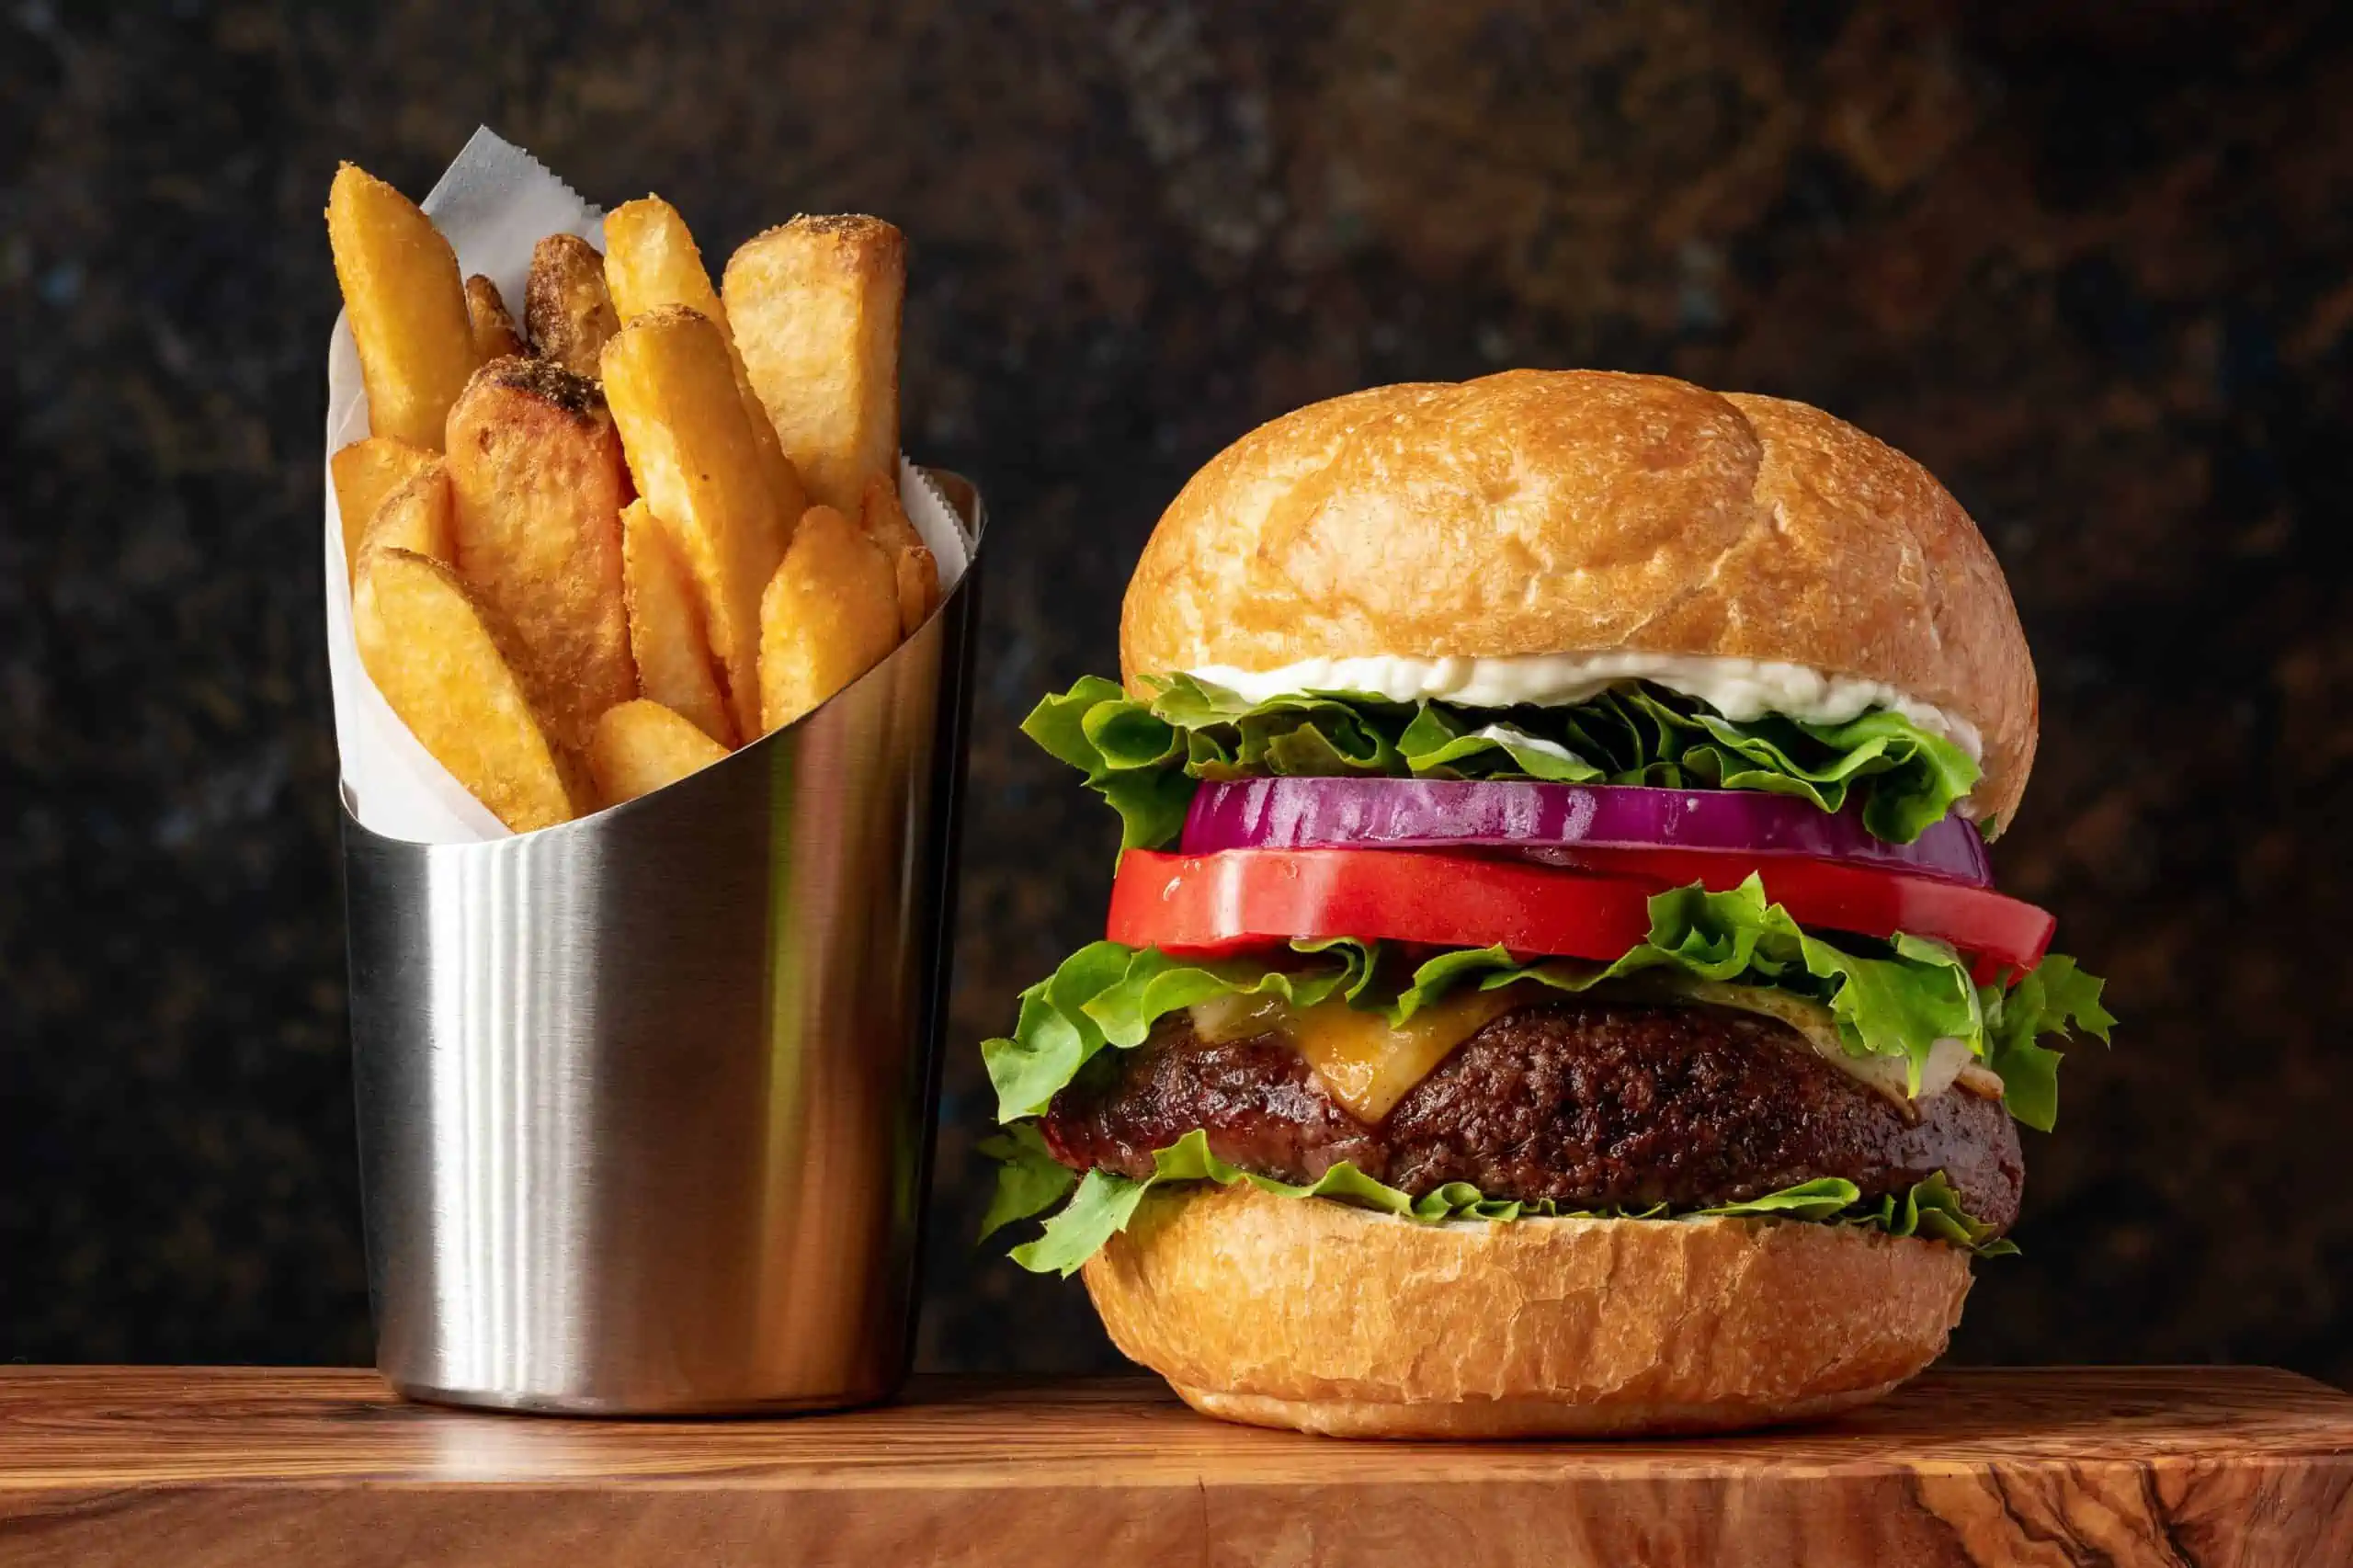 Hamburger day deals - Picture of cheeseburger with lettuce, tomato and red onion next to metal container of thick steak fries